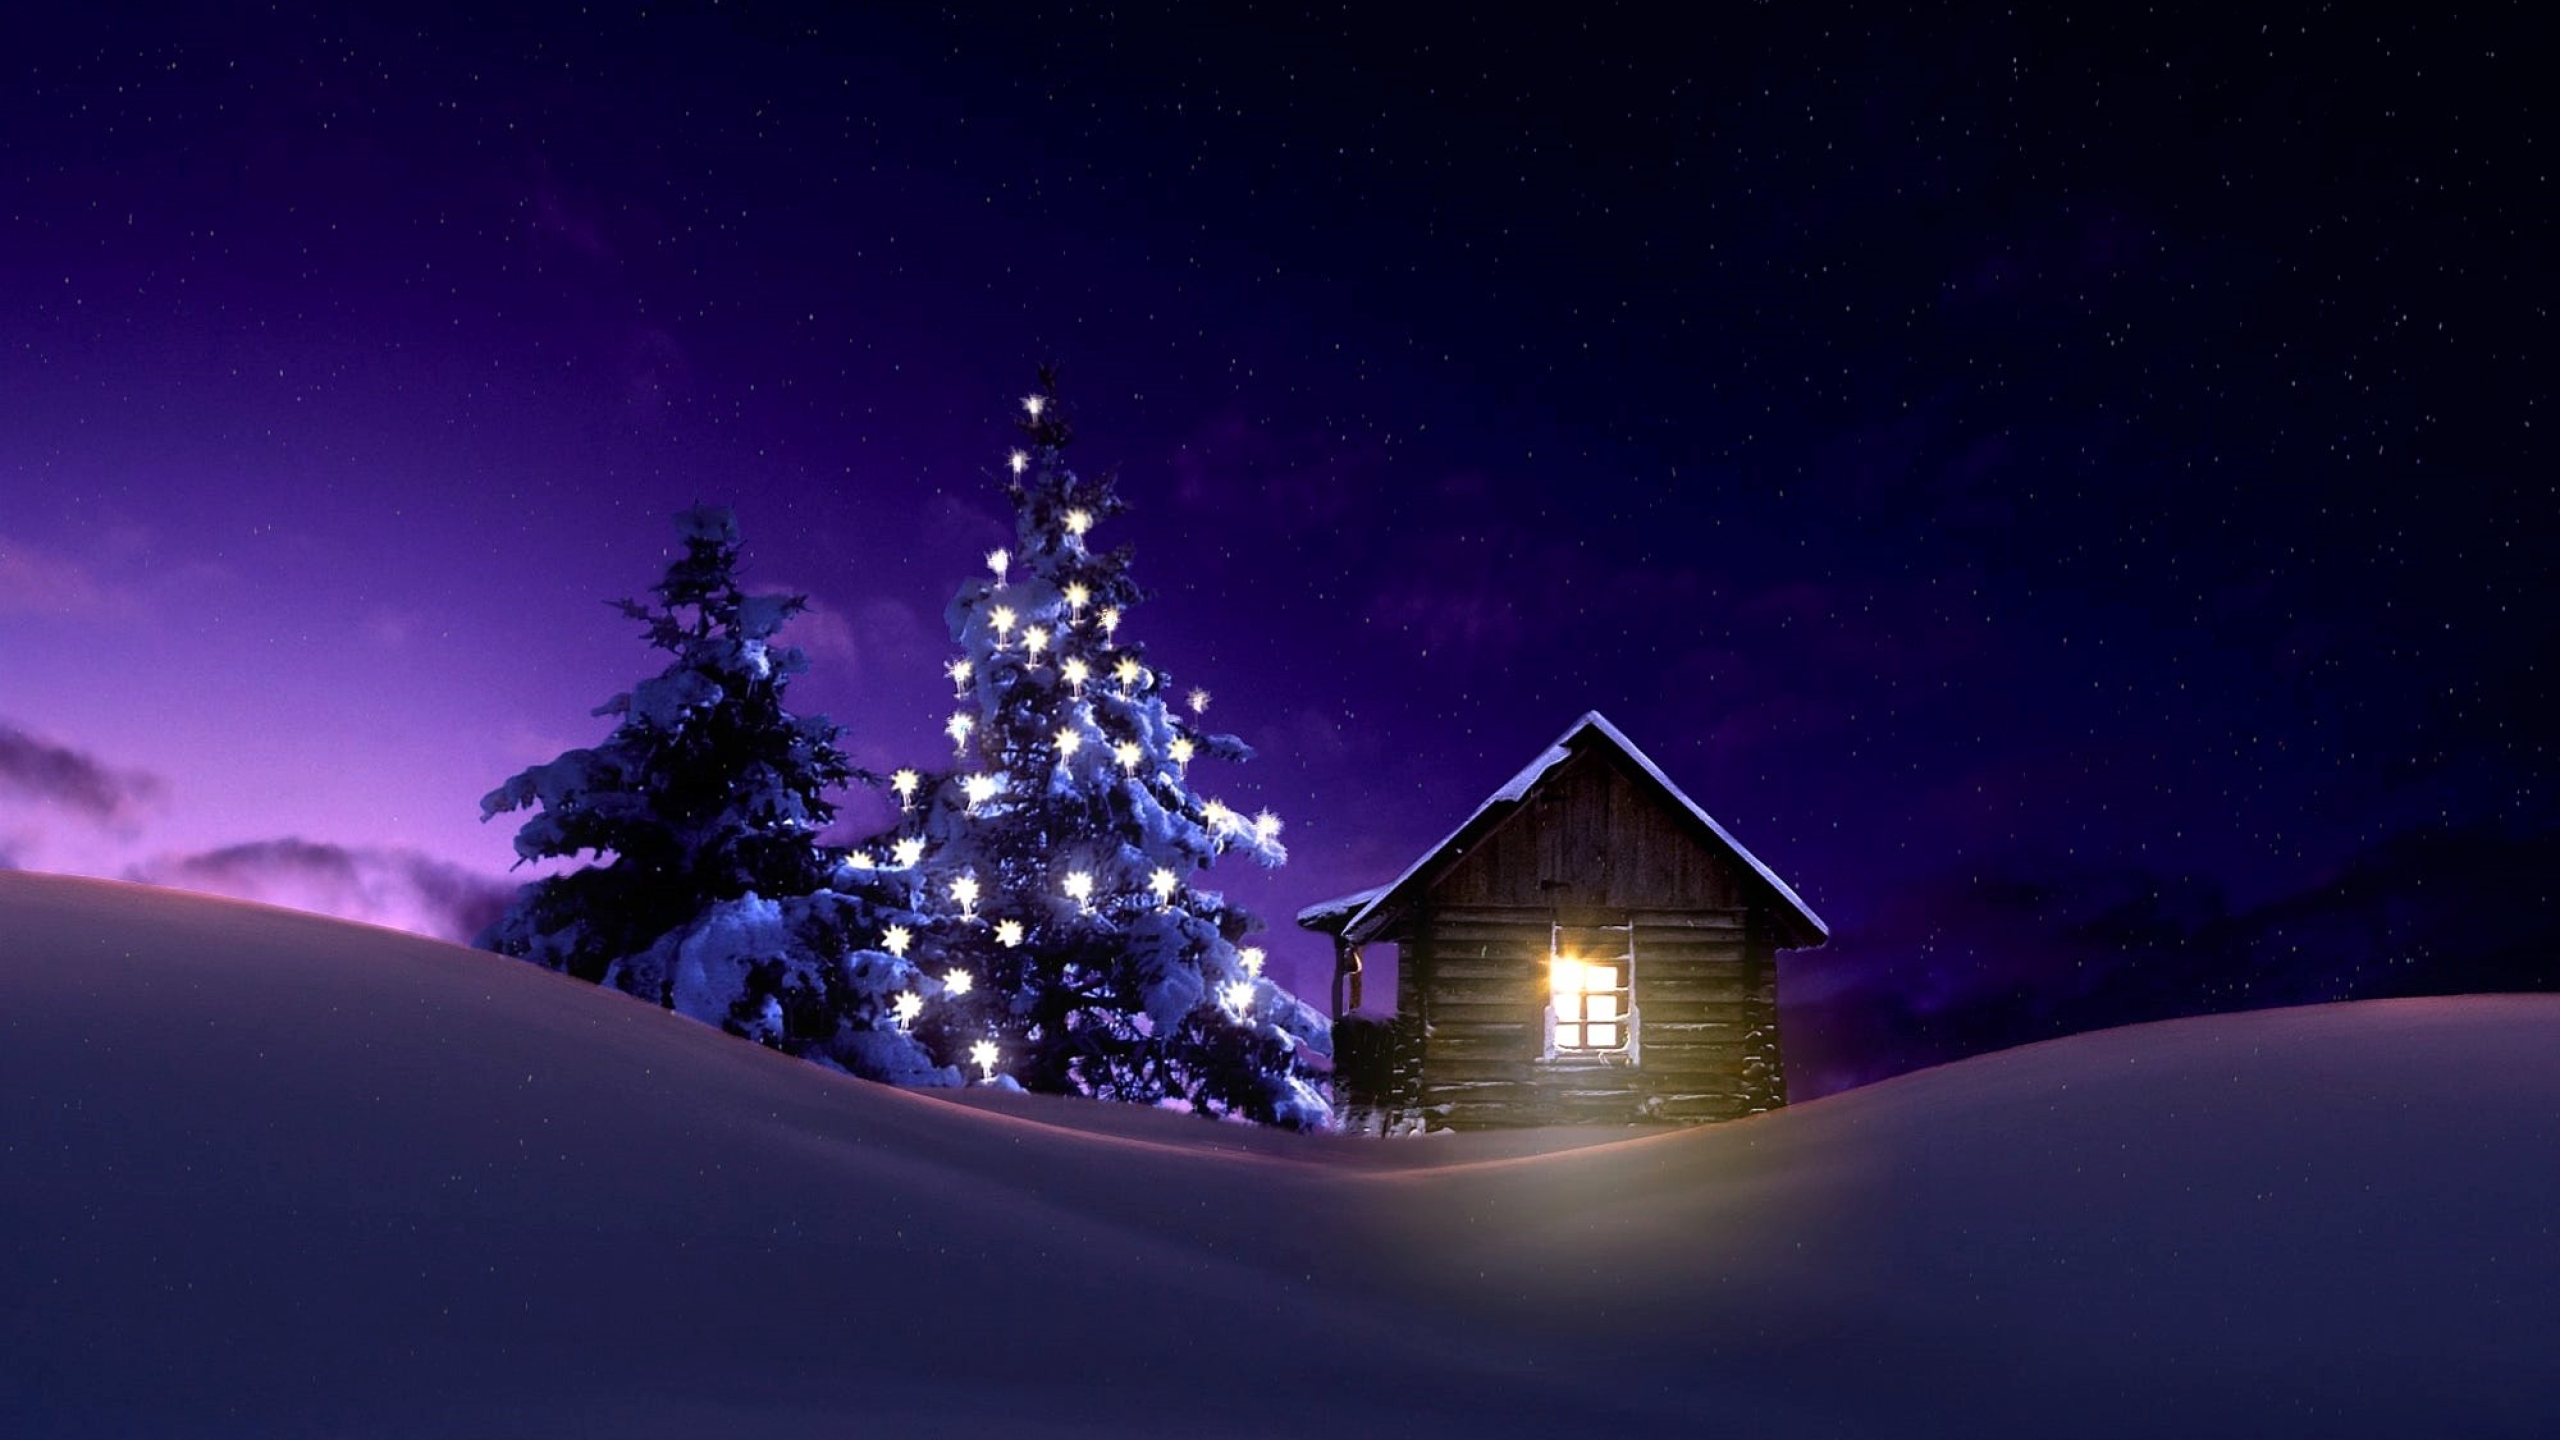 2560x1440-christmas-lighted-tree-outside-winter-cabin-1440p-resolution-wallpaper-hd-holidays-4k